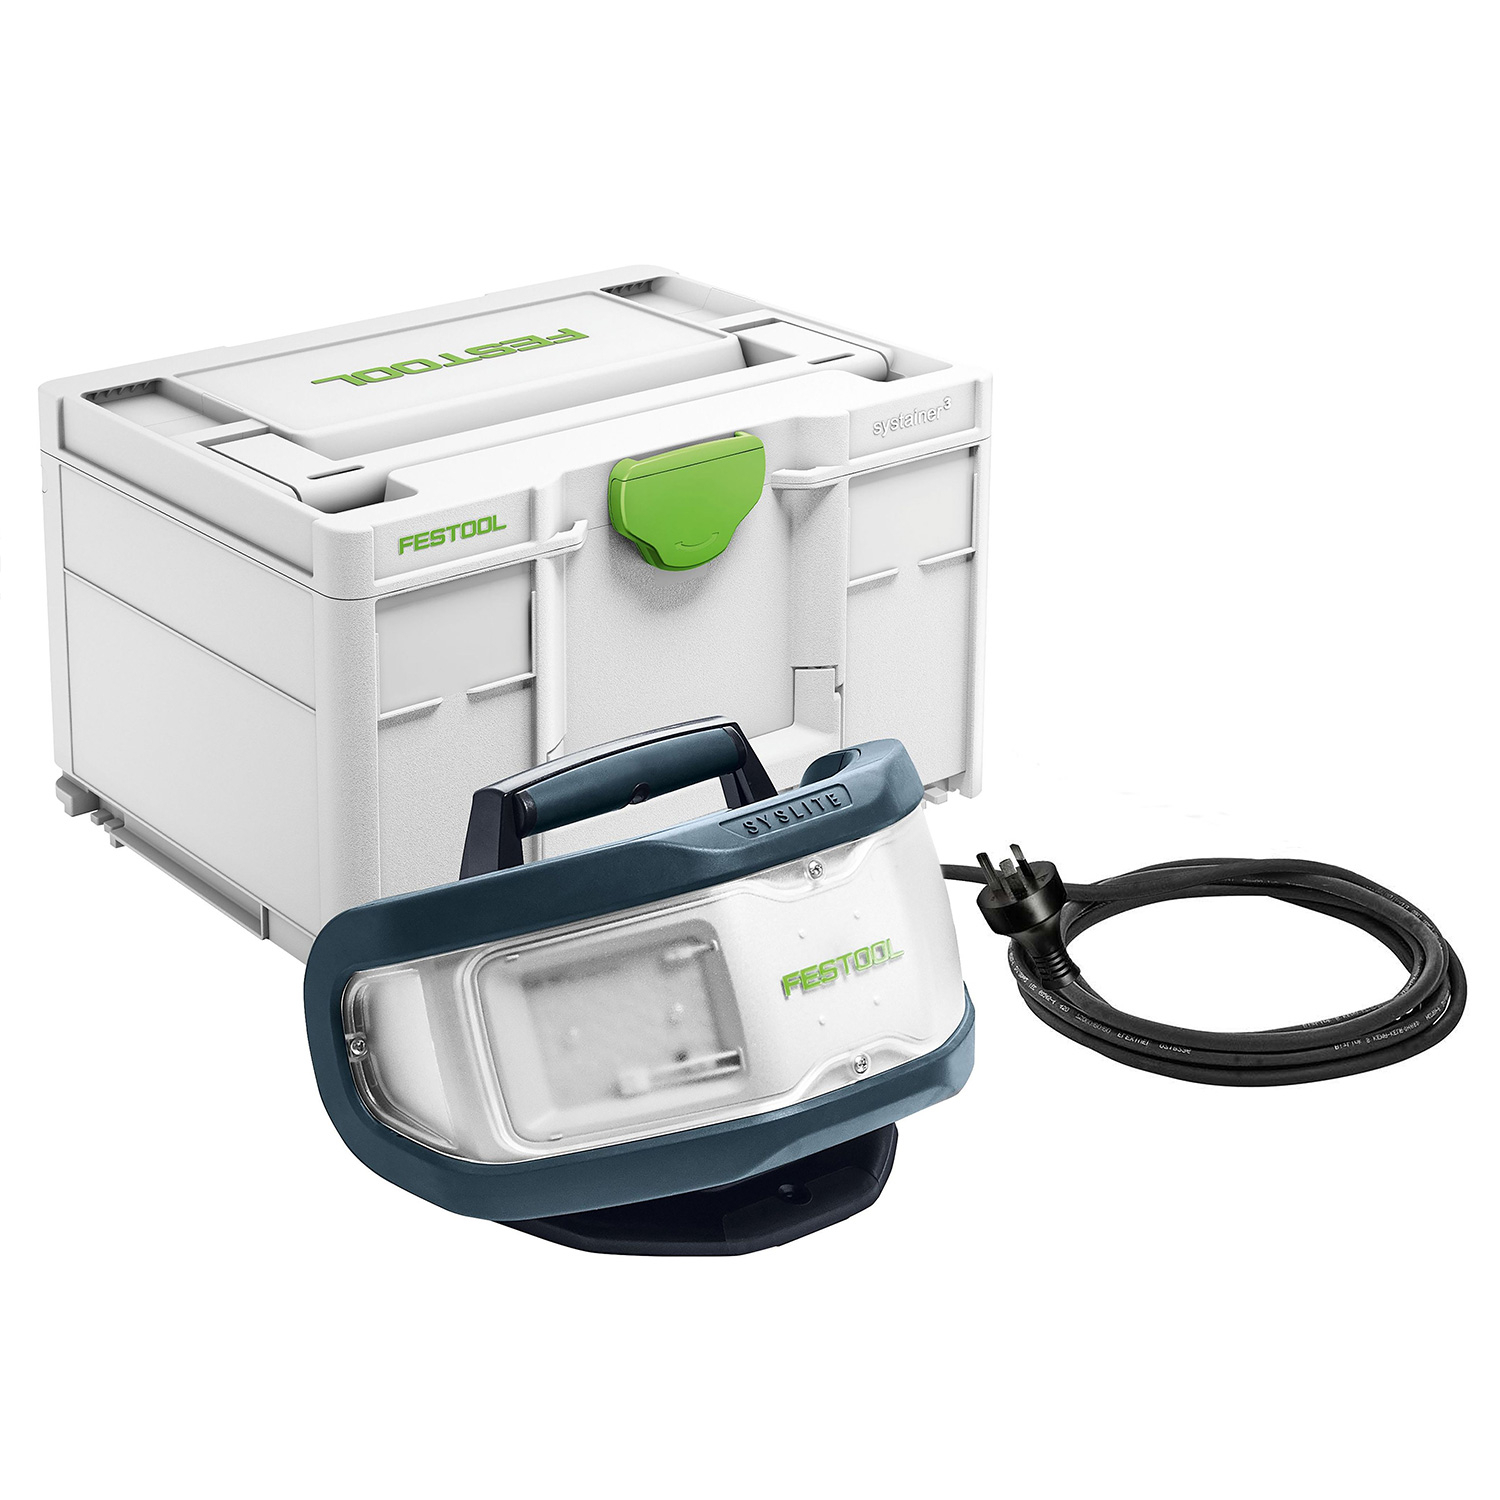 Festool SYSLITE DUO Work Light in Systainer DUO-Plus AU 576407